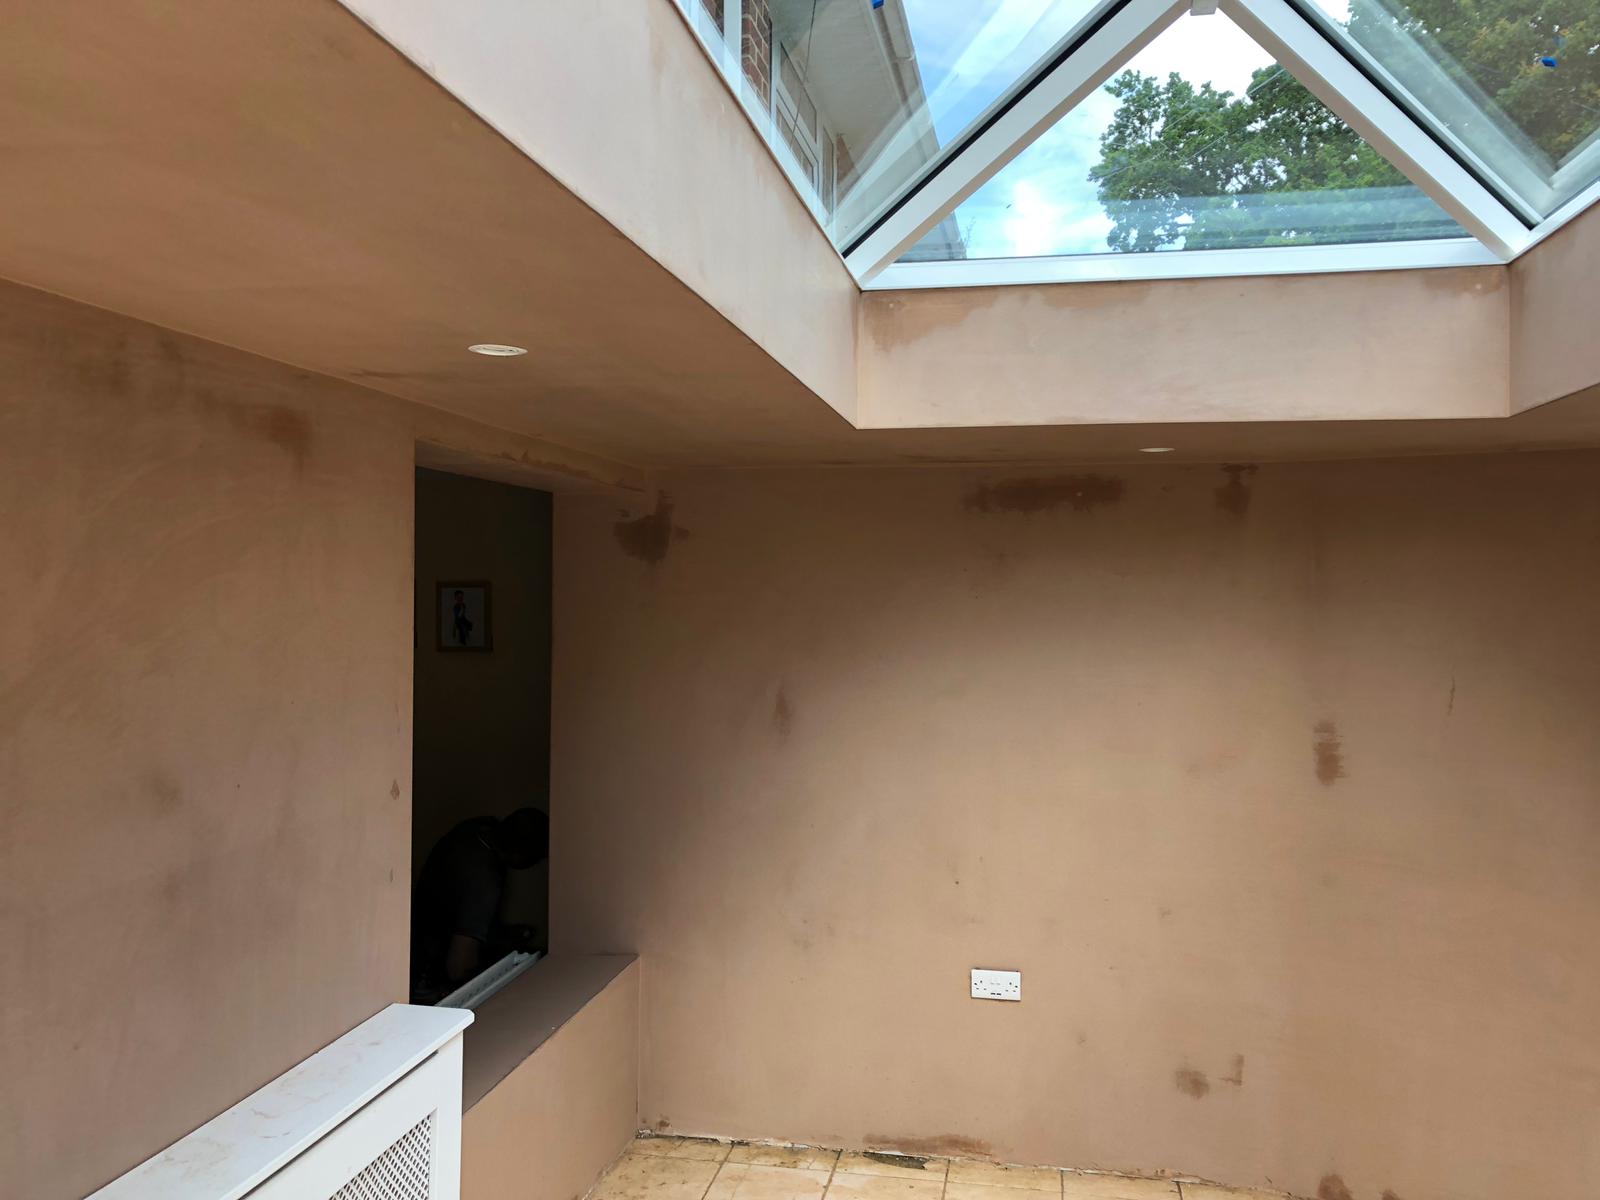 INSURANCE ESTIMATE, FLOODS, BROKEN CONSERVATORY, DAMAGED CONSERVATORY ROOF, LEAKS, ROOF LEAKS, FLOODS, DAMP ISSUES, COLLAPSED CONSERVATORY QUOTE, ROOF REPAIRS, BUILDER COMPLETION WORKS, FINISHING JOBS LEFT OVER, INSURANCE QUOTE